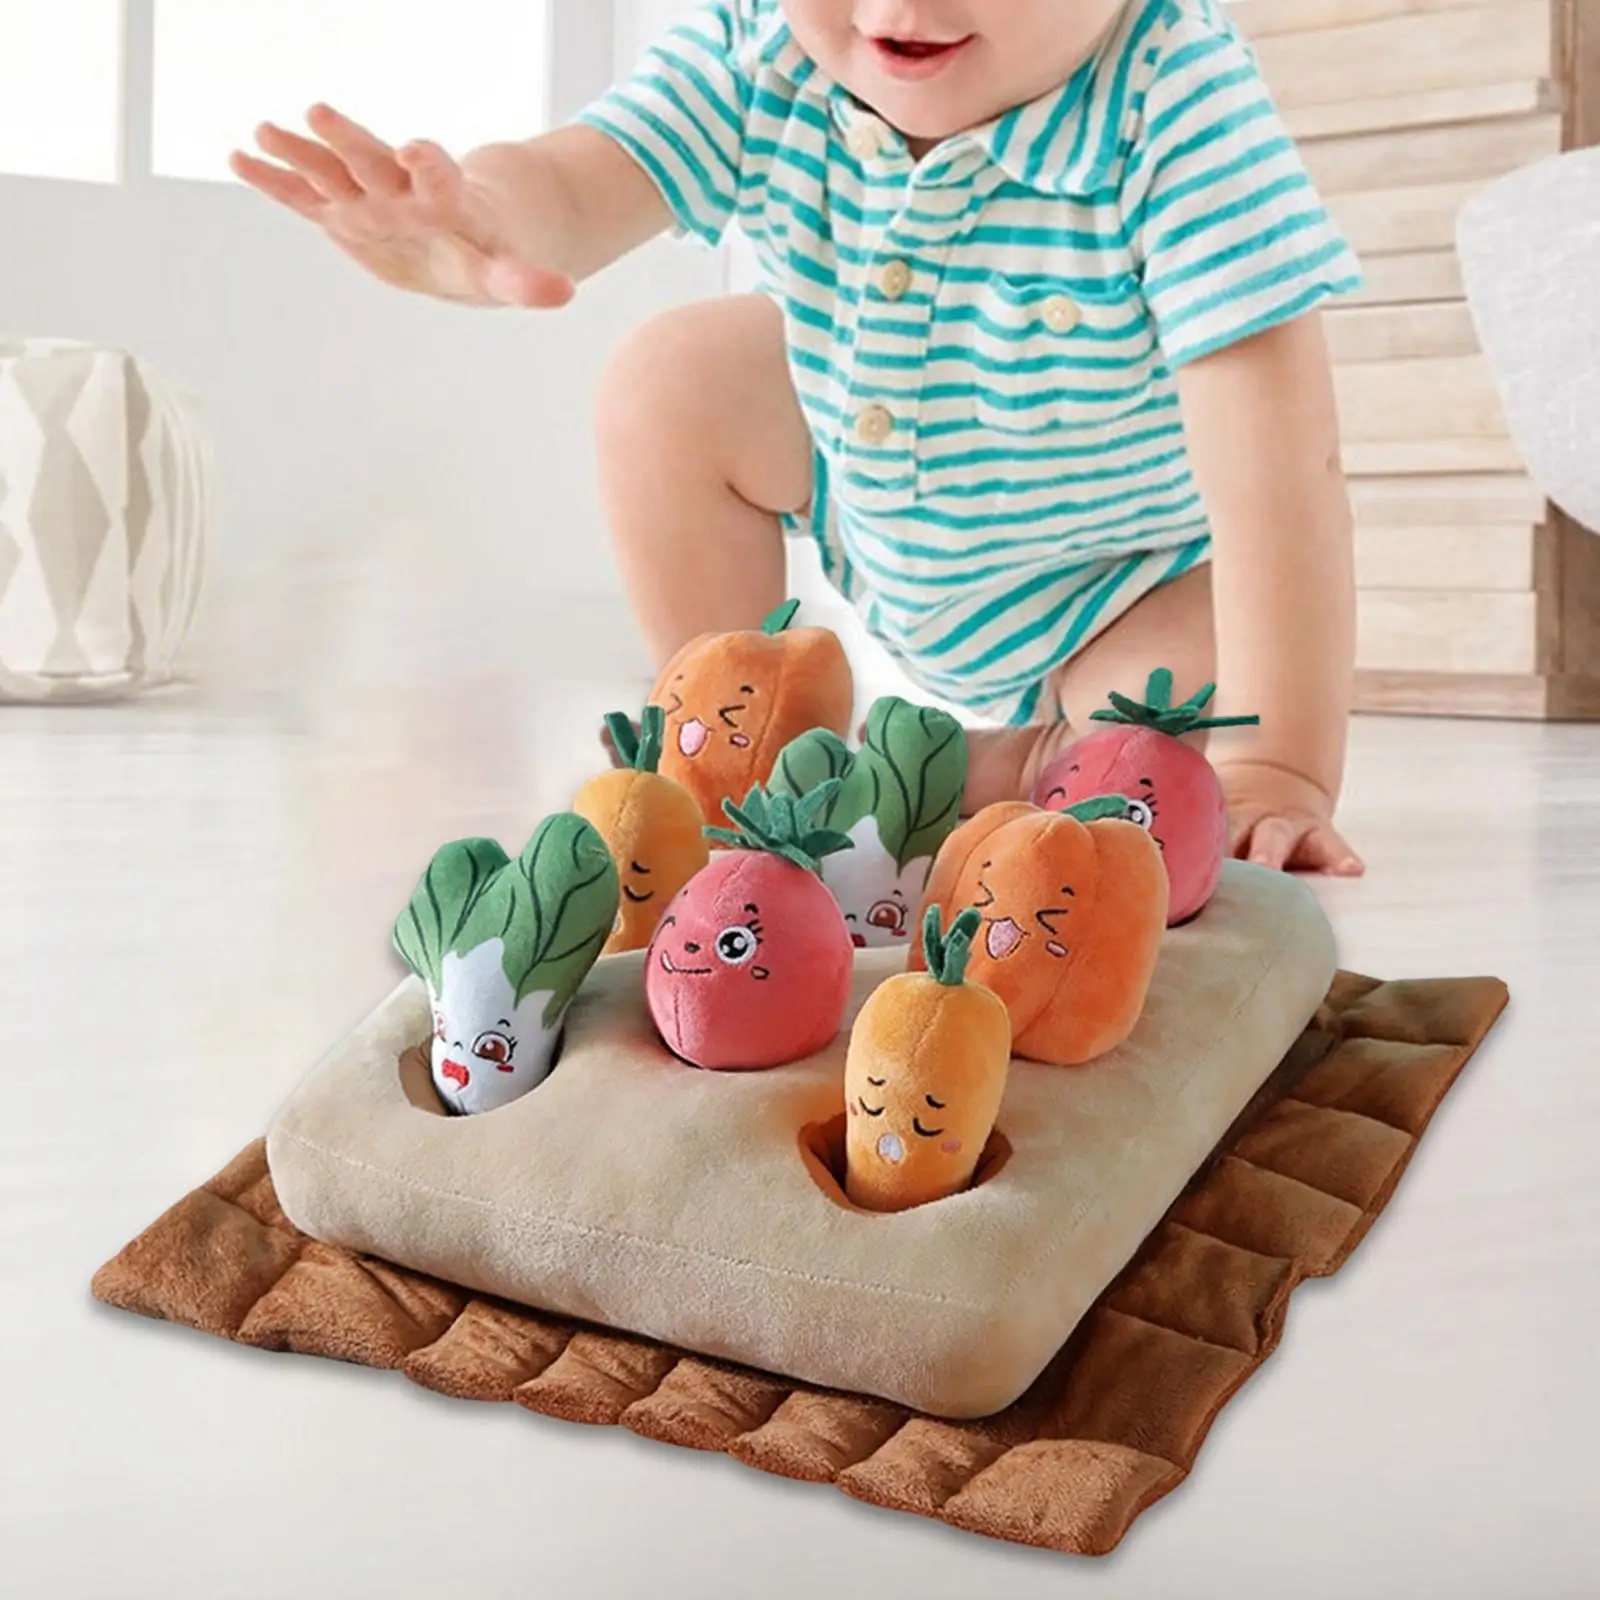 Baby Preschool Learning Toy Vegetable Plush Toy Durable for Toddlers Age 1-3